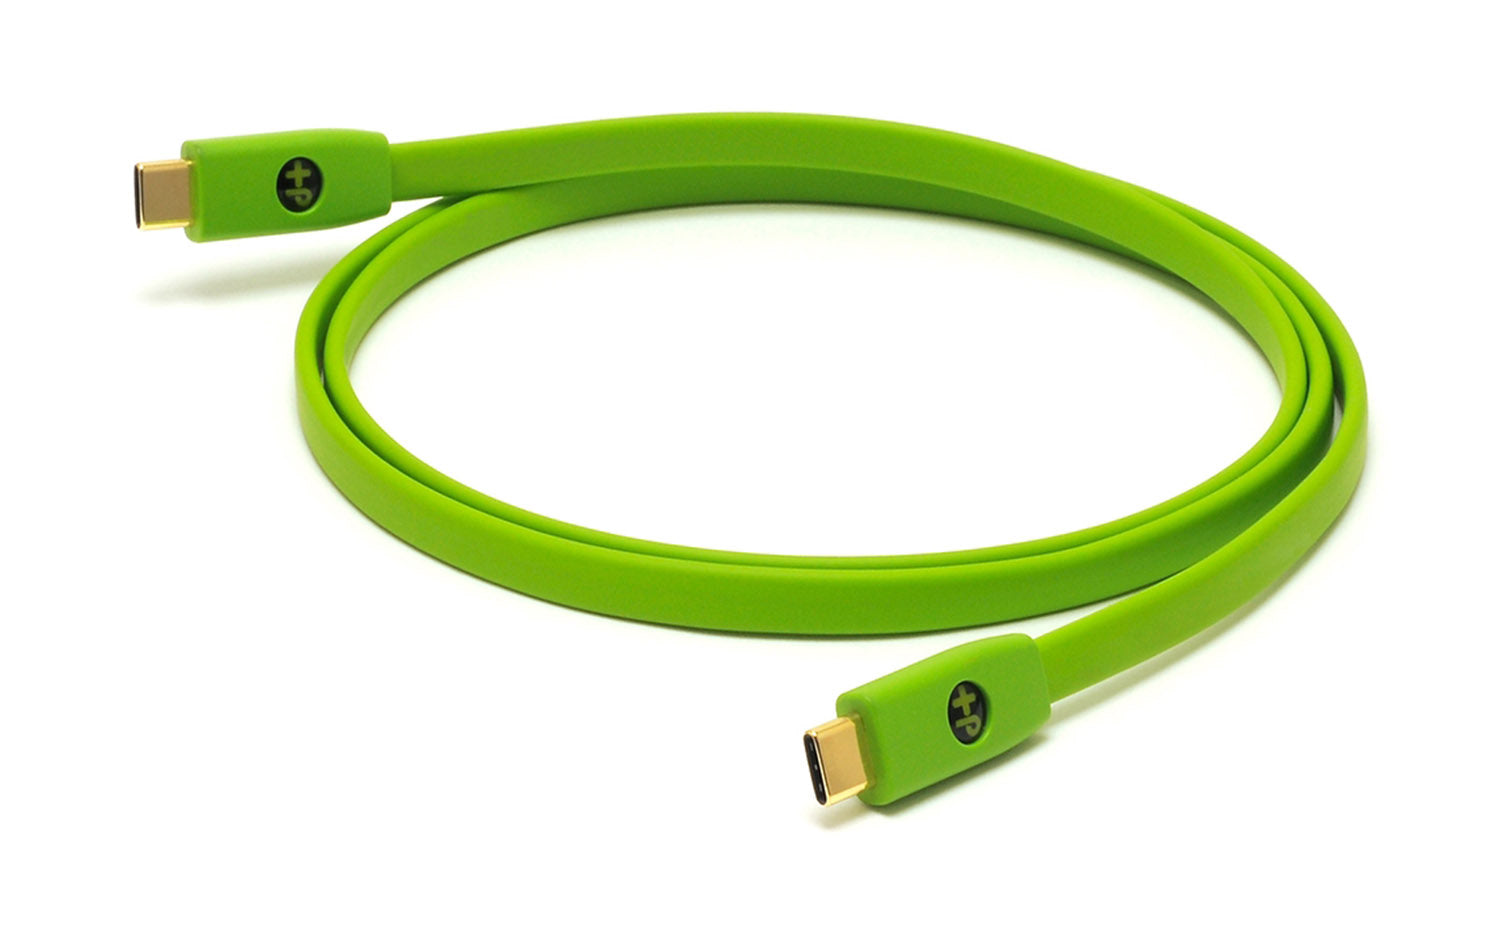 Oyaide Neo d+ USB 2.0 Type-C to Type-C Class B Cable 1M - Hollywood DJ